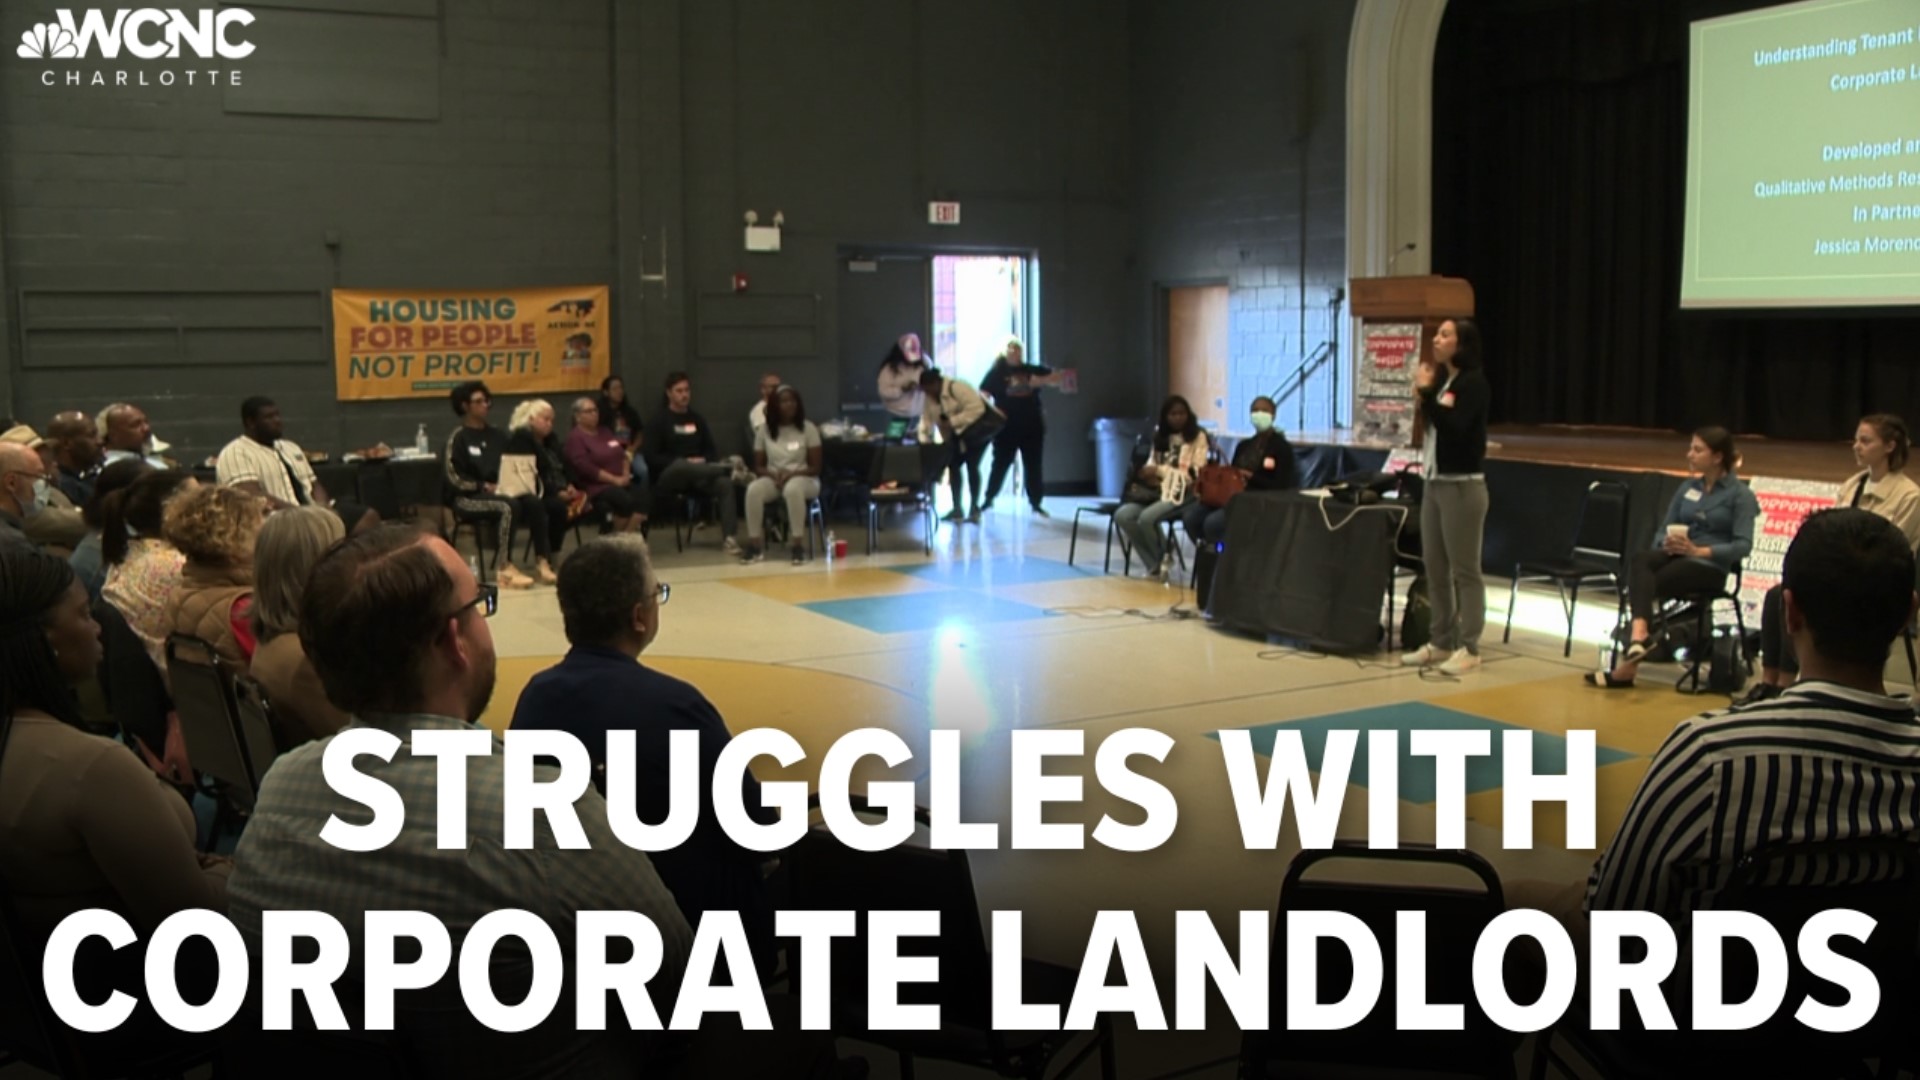 UNC Charlotte researchers are shining a light on the city's struggle with corporate landlords.